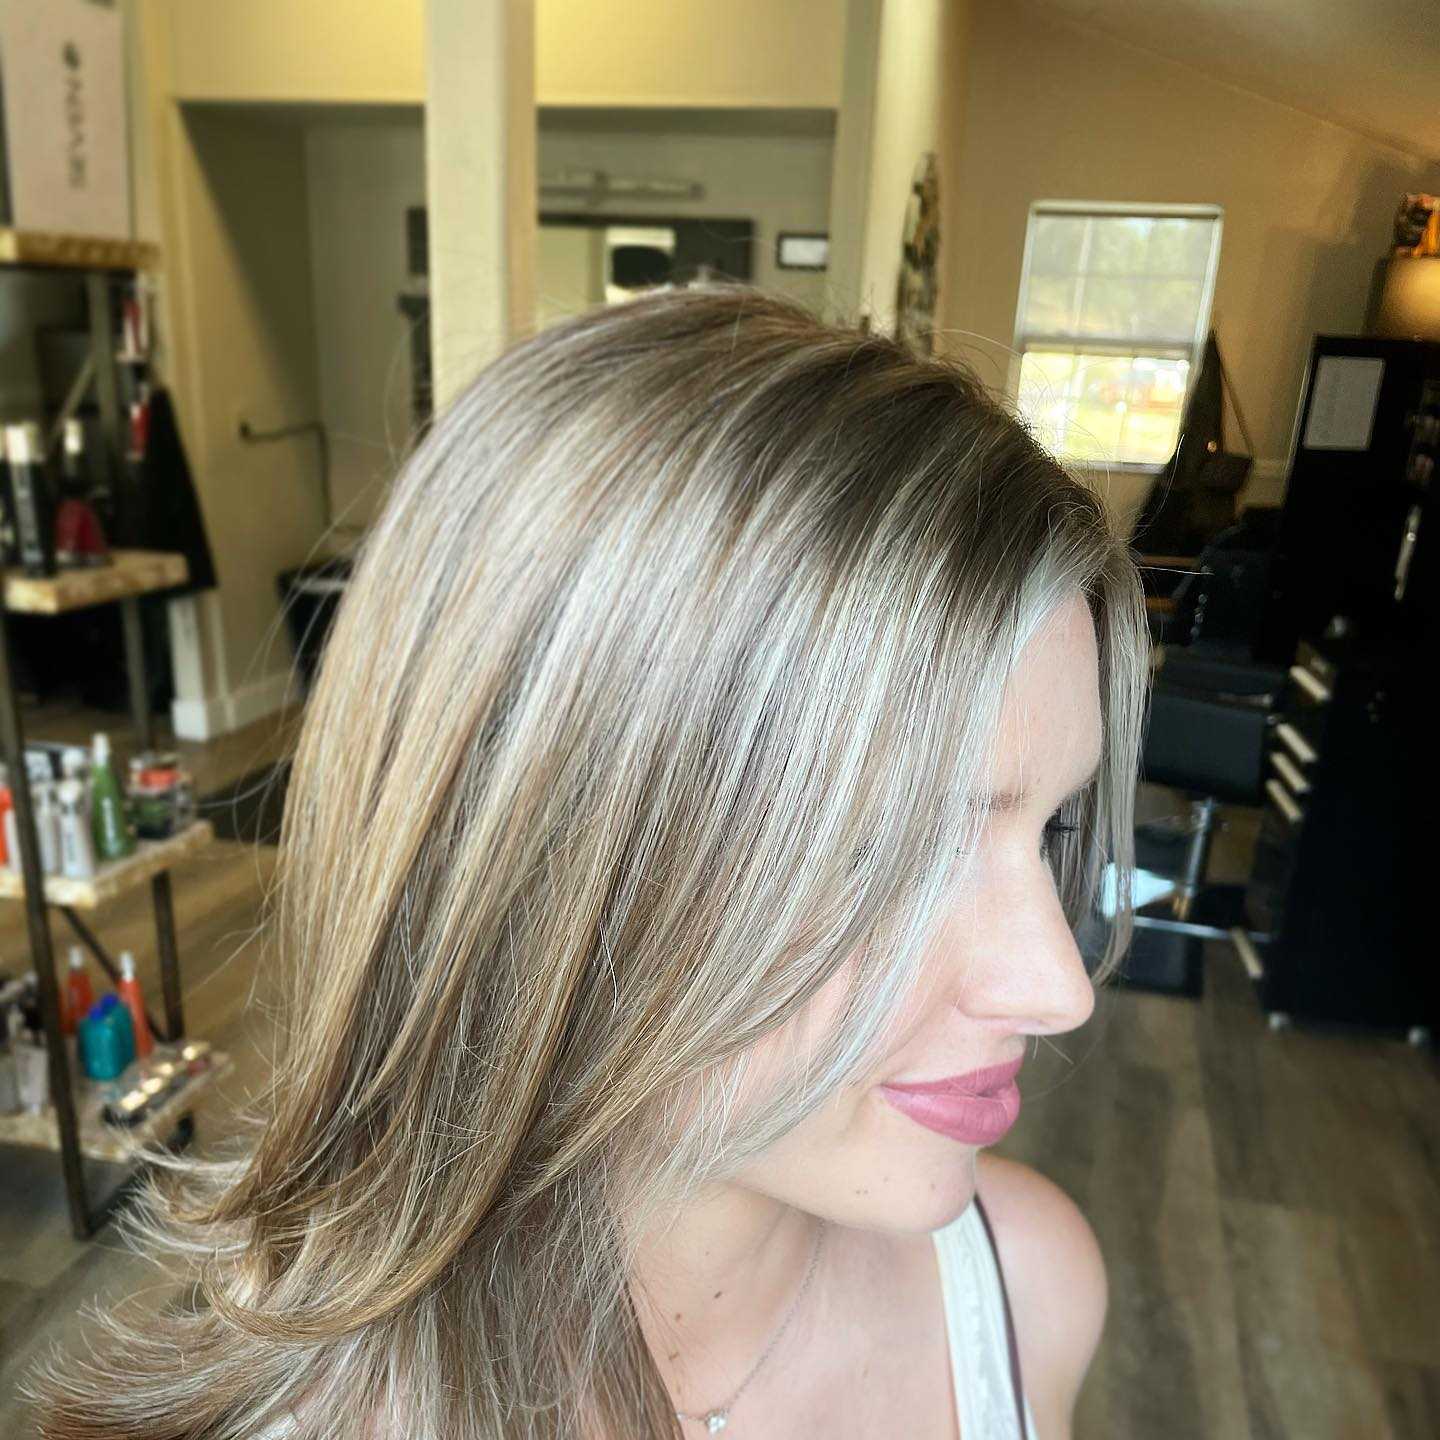 blonde highlights to blonde hair creates depth and vibrancy that stands out